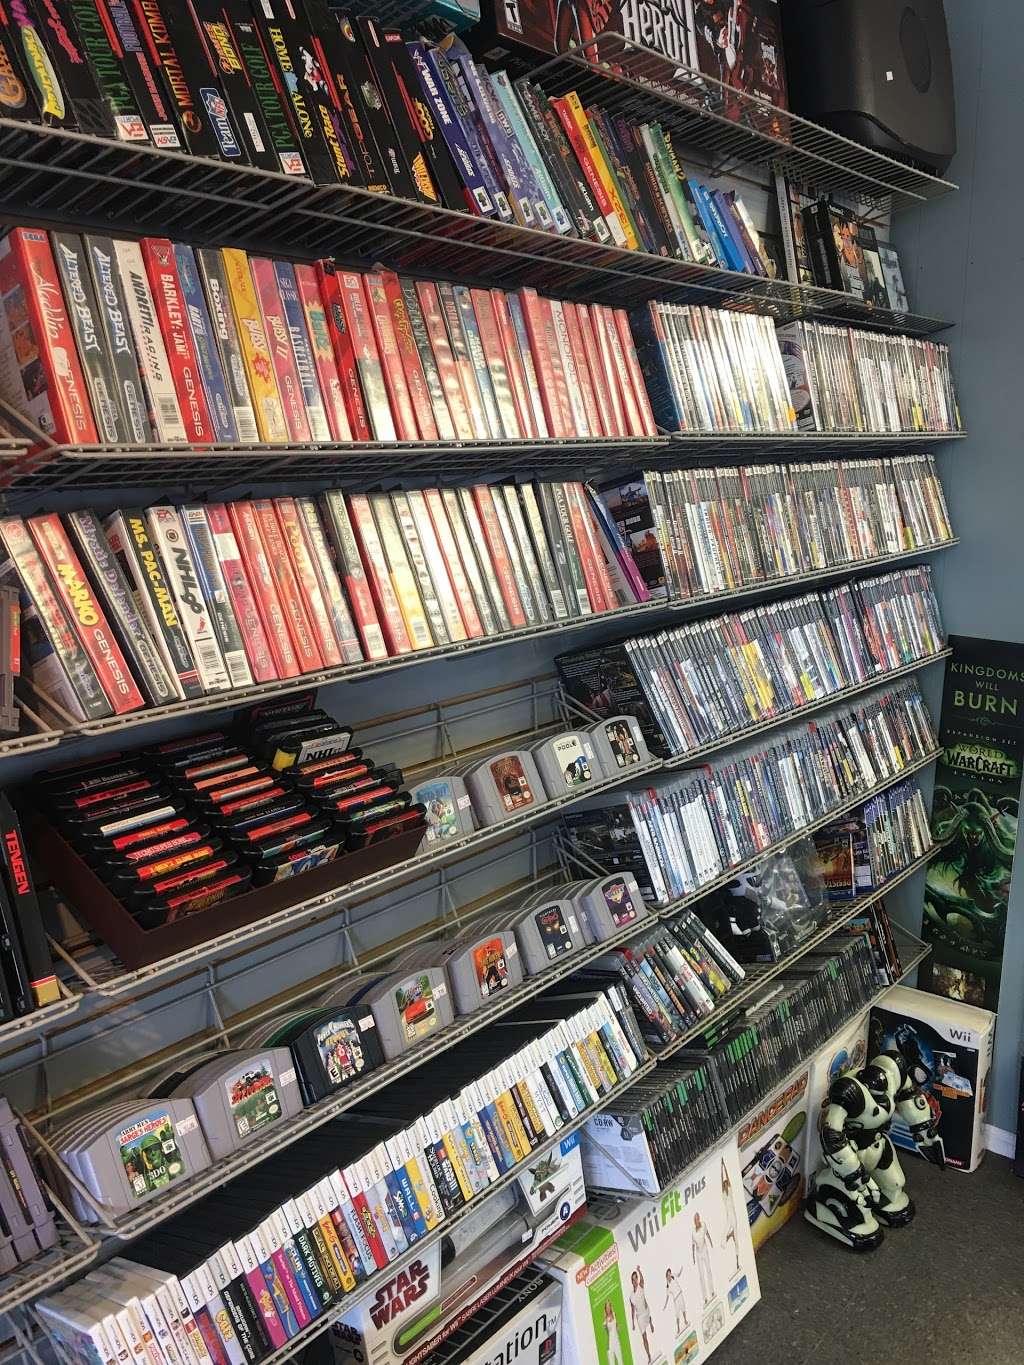 Merrimac Games and Collectables | 10 Church St, Merrimac, MA 01860 | Phone: (978) 384-8237